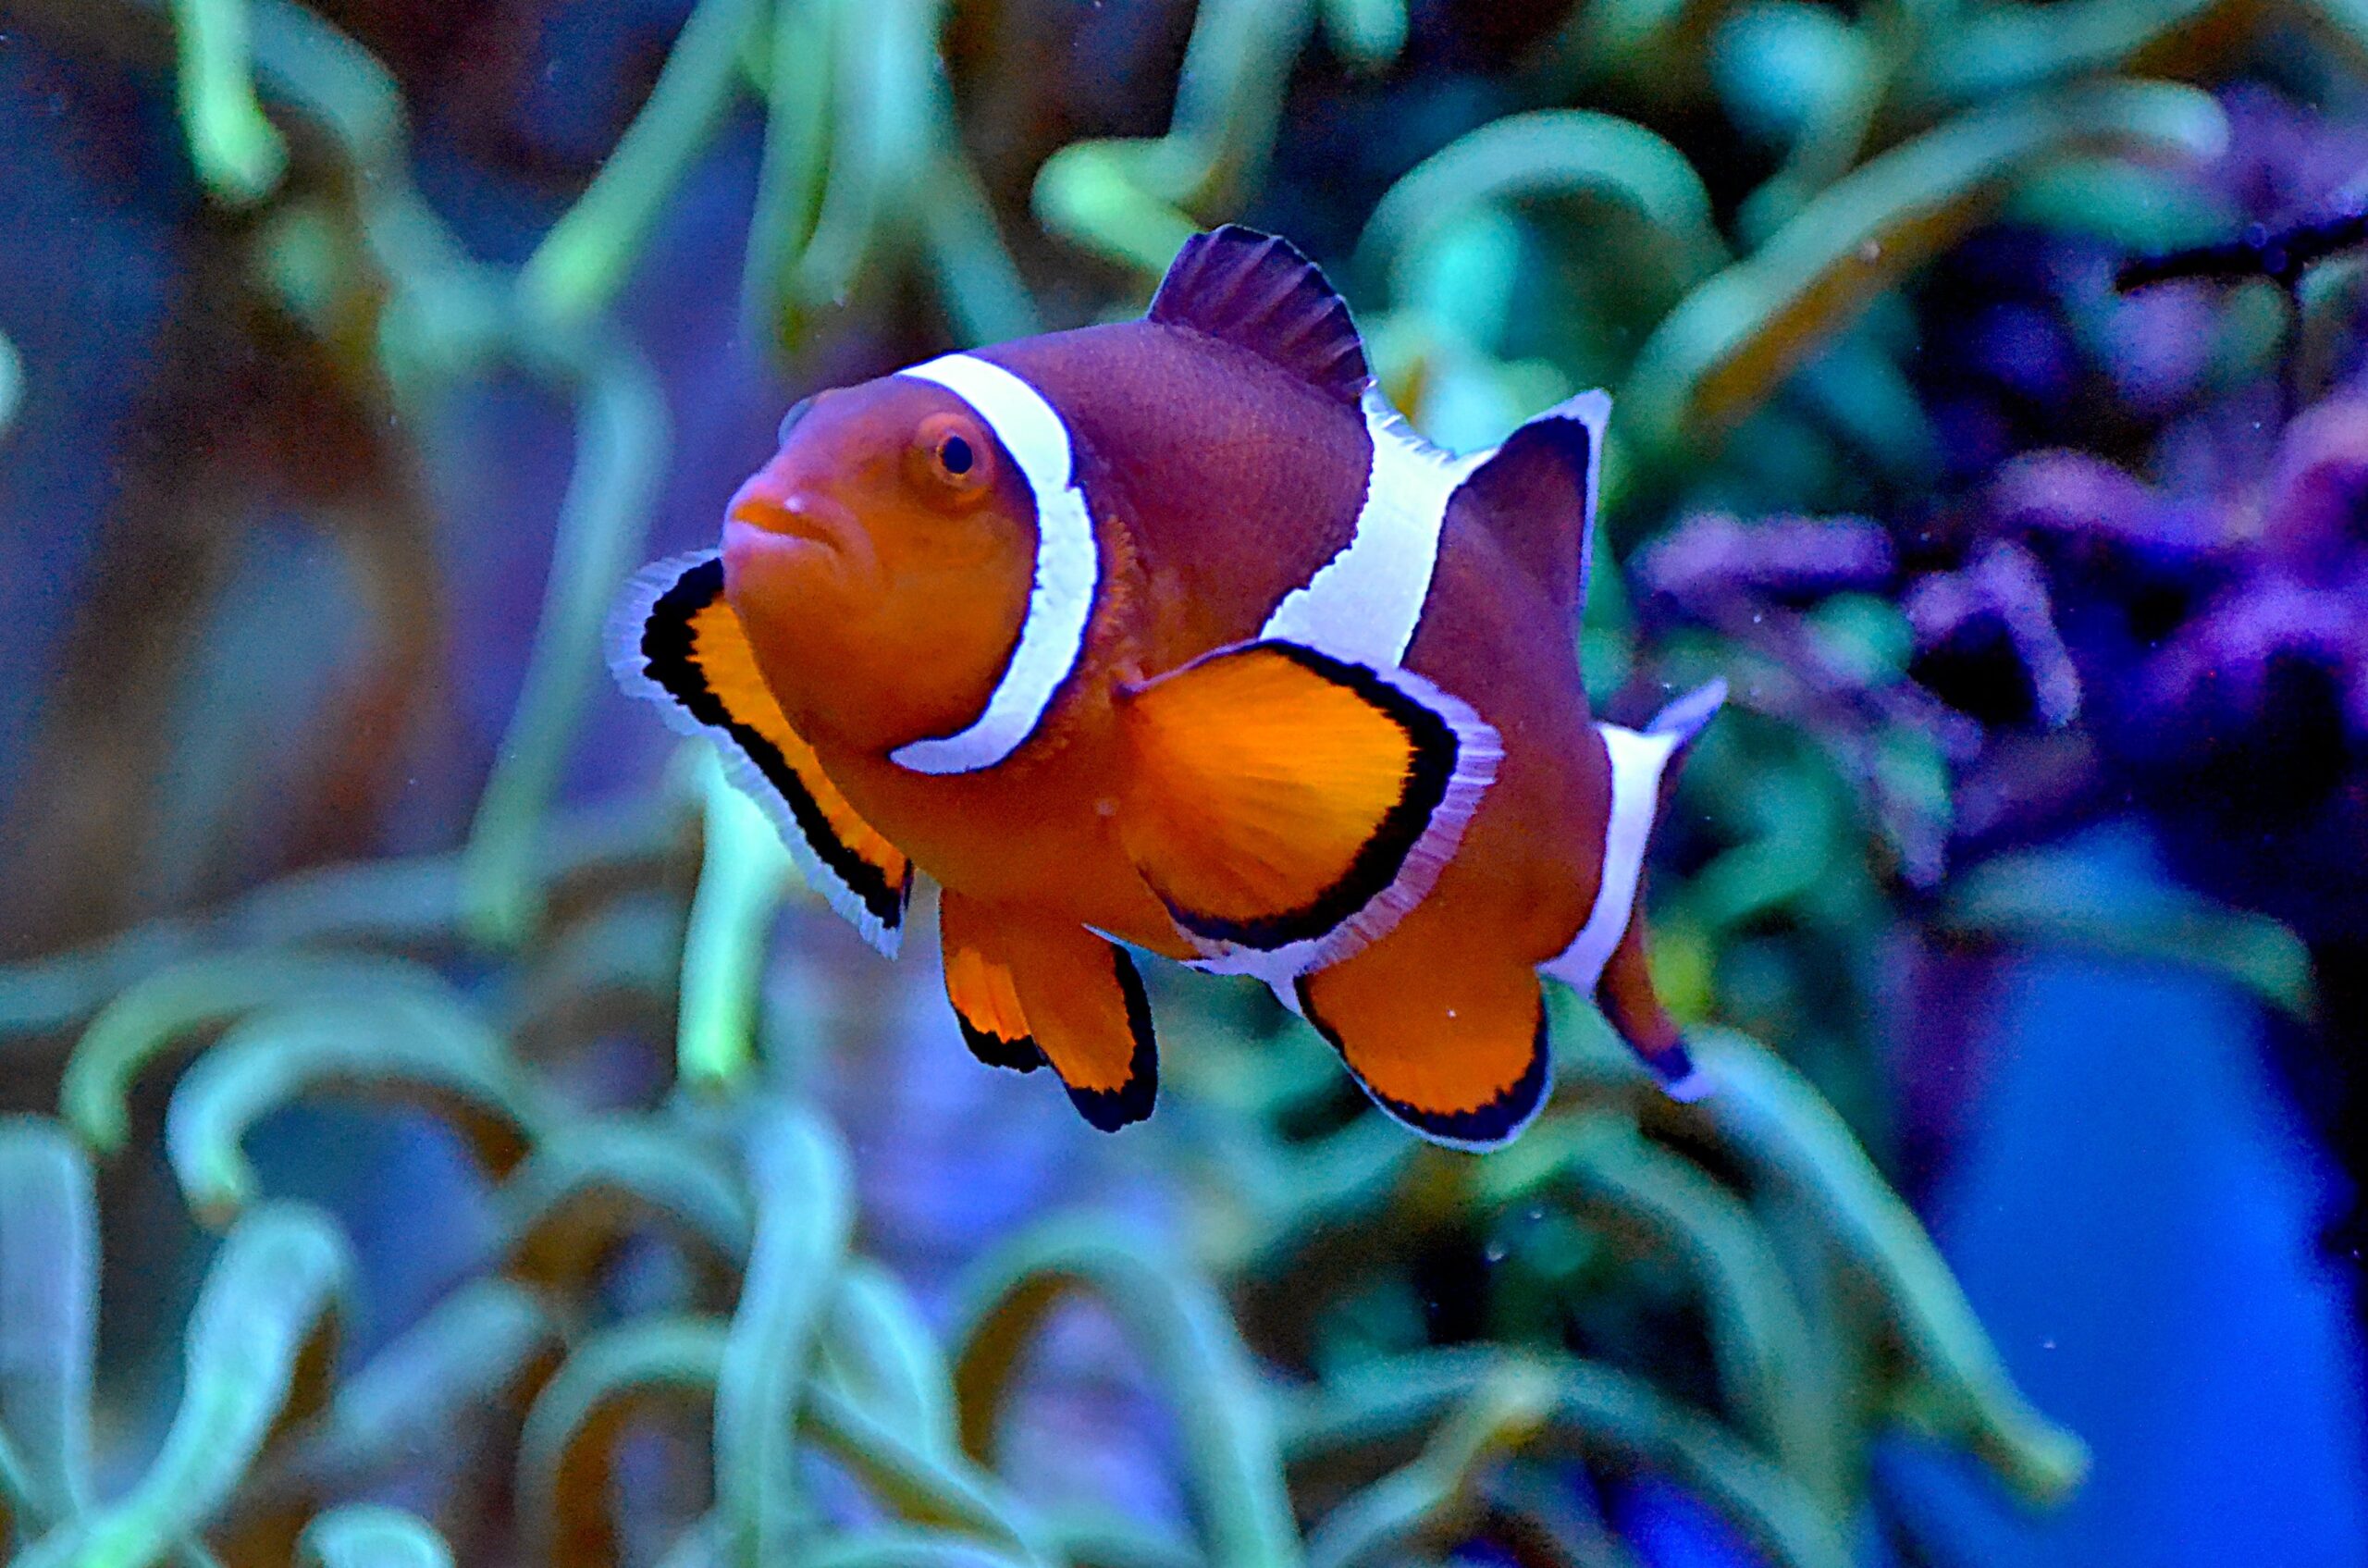 Saltwater fish tanks are a captivating way to bring the beauty and wonder of the ocean into your home. Even if you have limited space, you can still create a stunning small saltwater fish tank that will be enjoyable and relaxing. In this article, we'll walk you through setting up and maintaining a small saltwater fish tank, covering everything from tank selection to water quality and a list of suitable fish species. Following these steps, you can transform a small corner of your home into a mesmerizing underwater world.